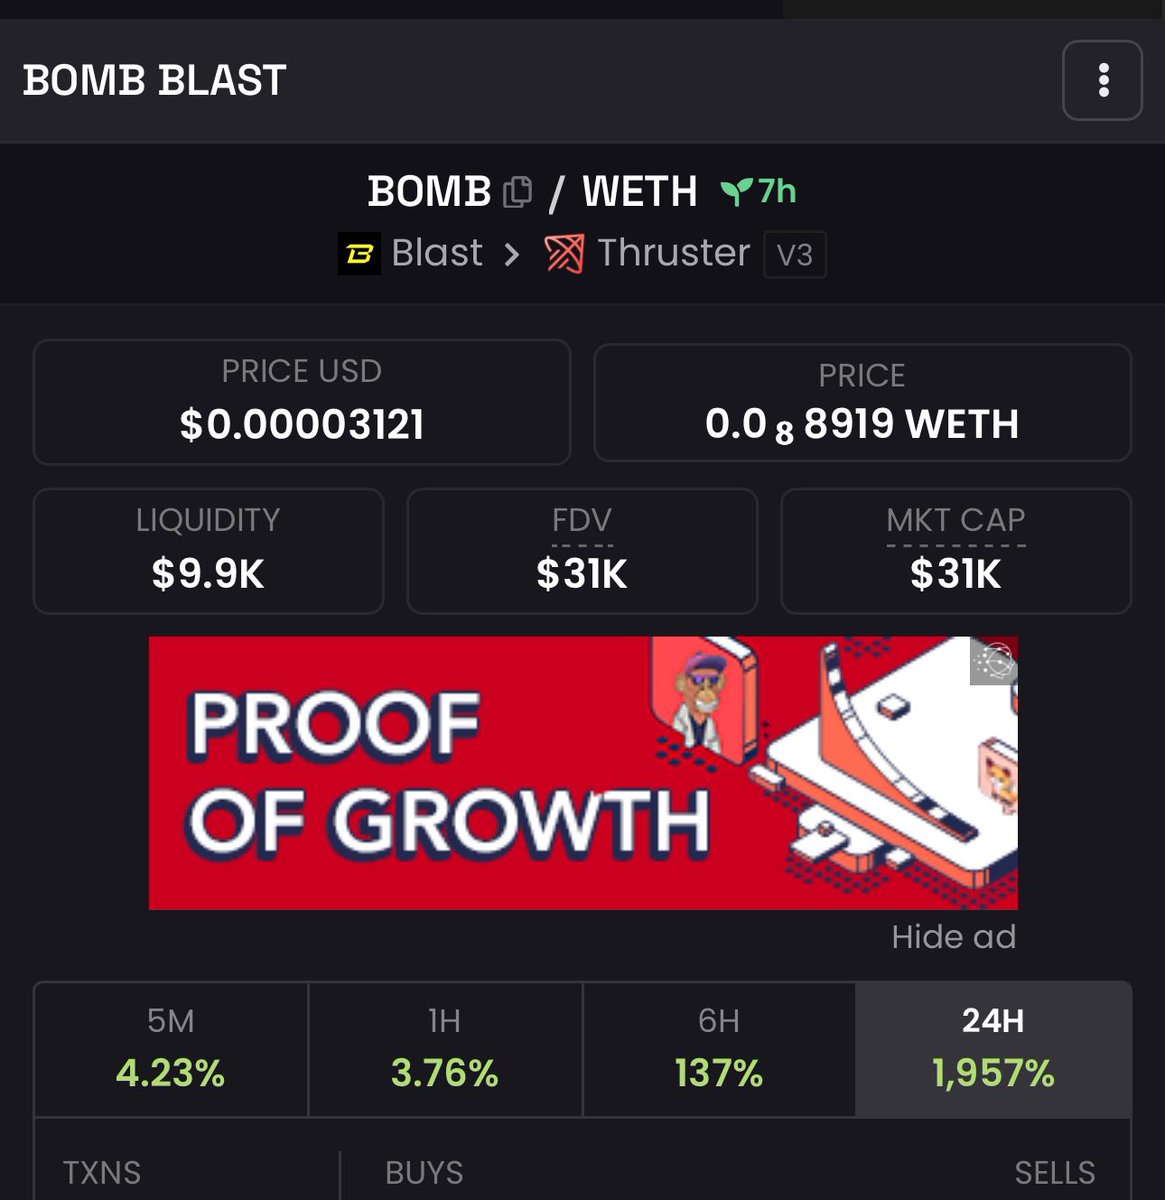 Bought $BOMB on #BLAST at 25k mc

This is a zero brainer play on Blast cuz the ticker rhymes with the network, I expect to see it above a mil in the long term. The TVL of Blast is over $3B, certainly a meme szn is around the corner, I just love the $BOMB broskis

@BombBlast_